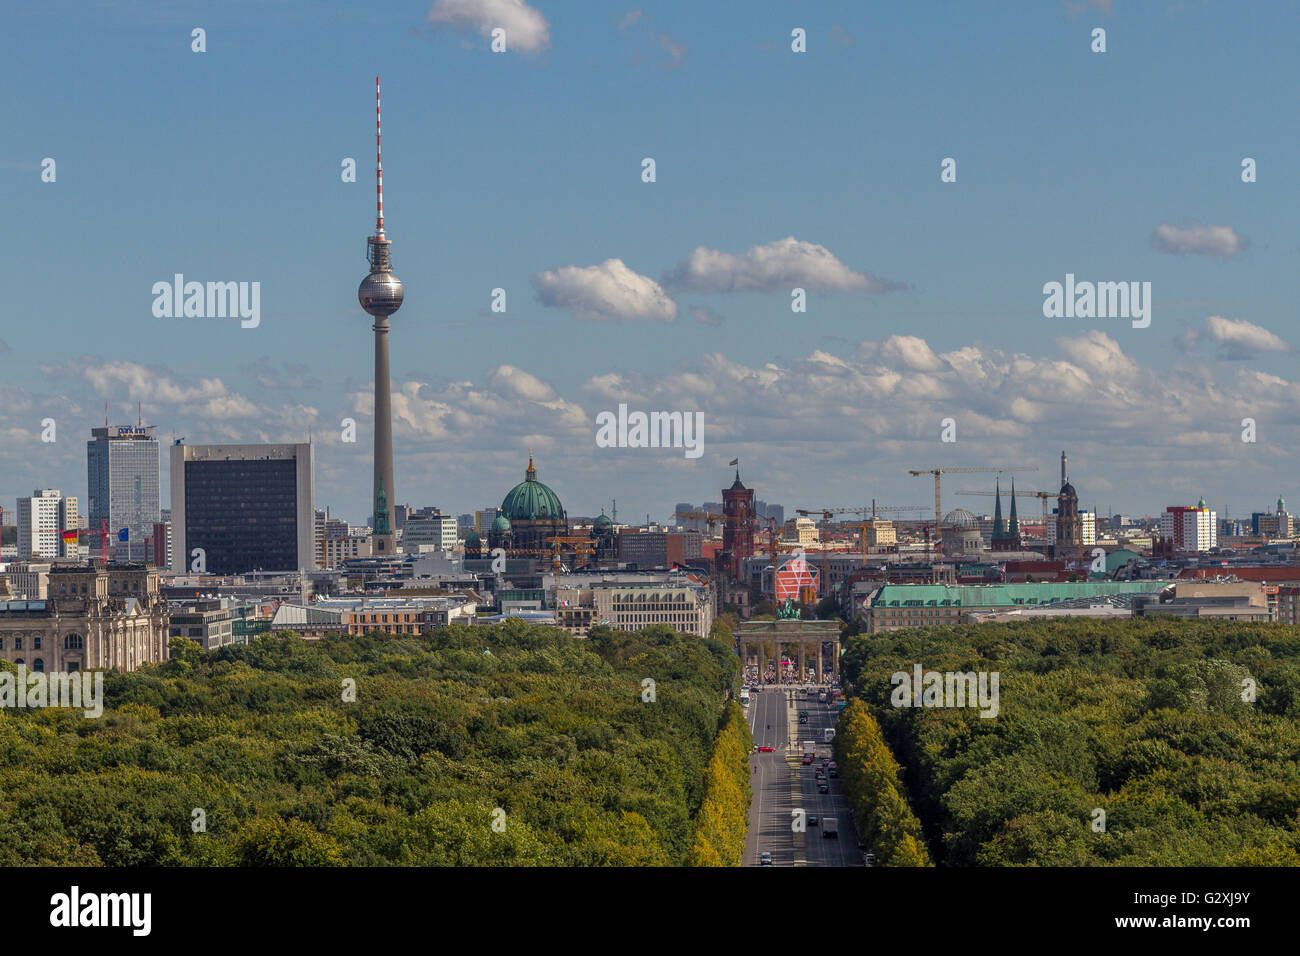 A view of the Berlin skyline with The TV Tower or Fernsehturm inhte distance, from The top of the Siegessaule or Victory Column ,Berlin, Germany Stock Photo